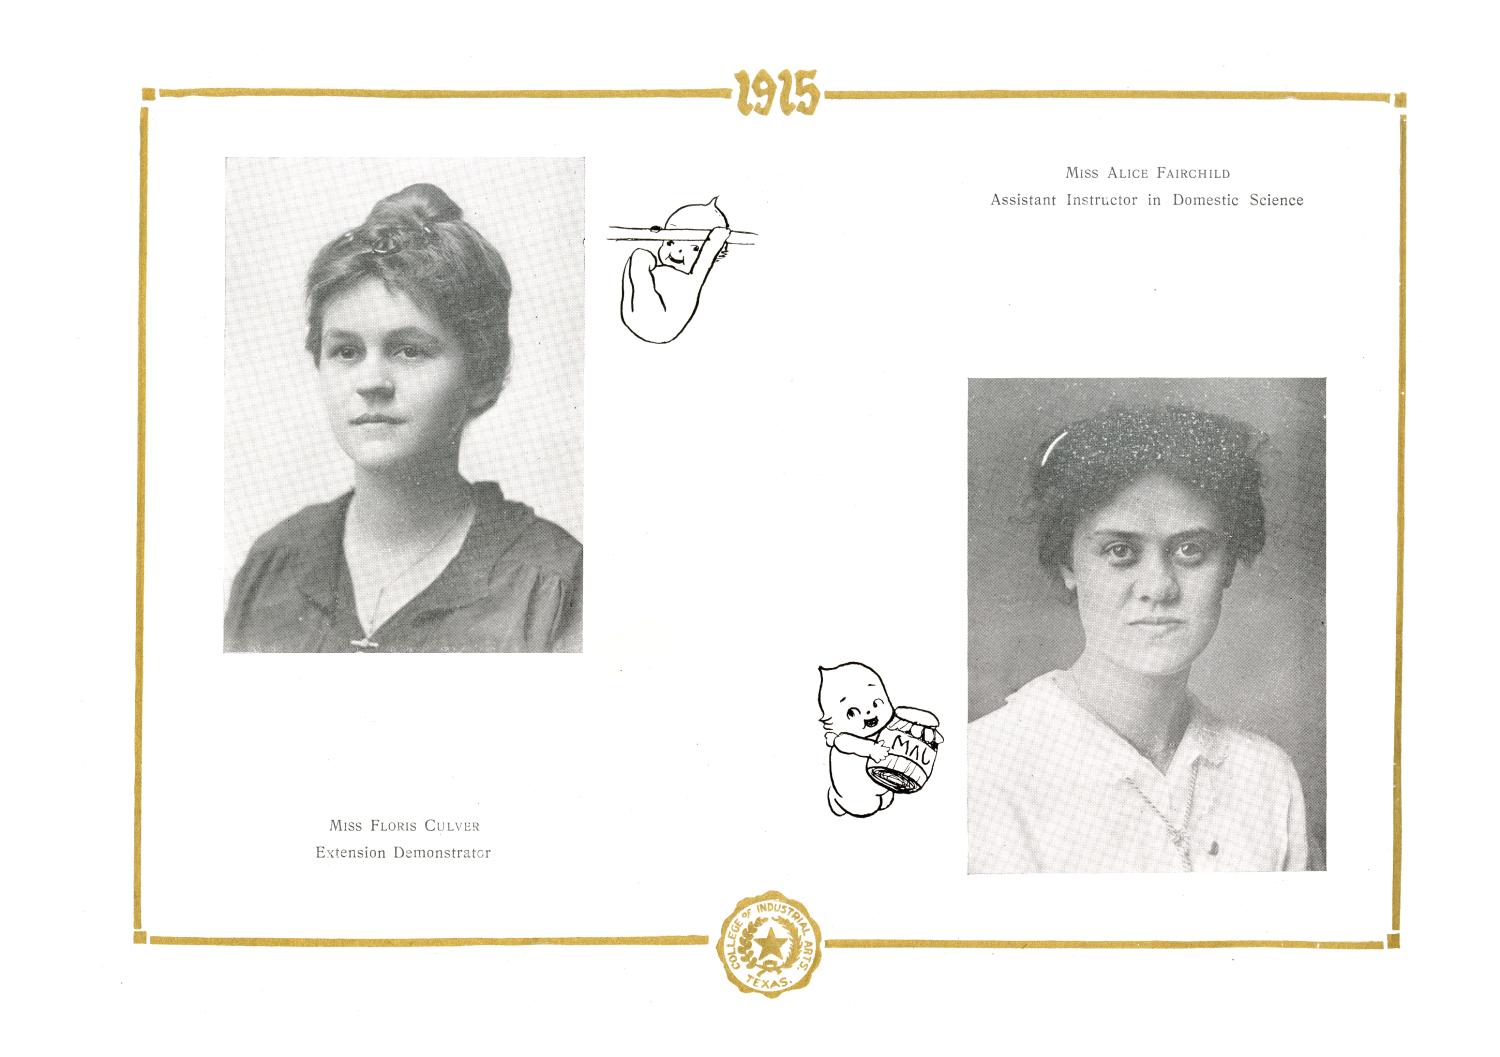 The Daedalian, Yearbook of the College of Industrial Arts, 1915
                                                
                                                    34
                                                